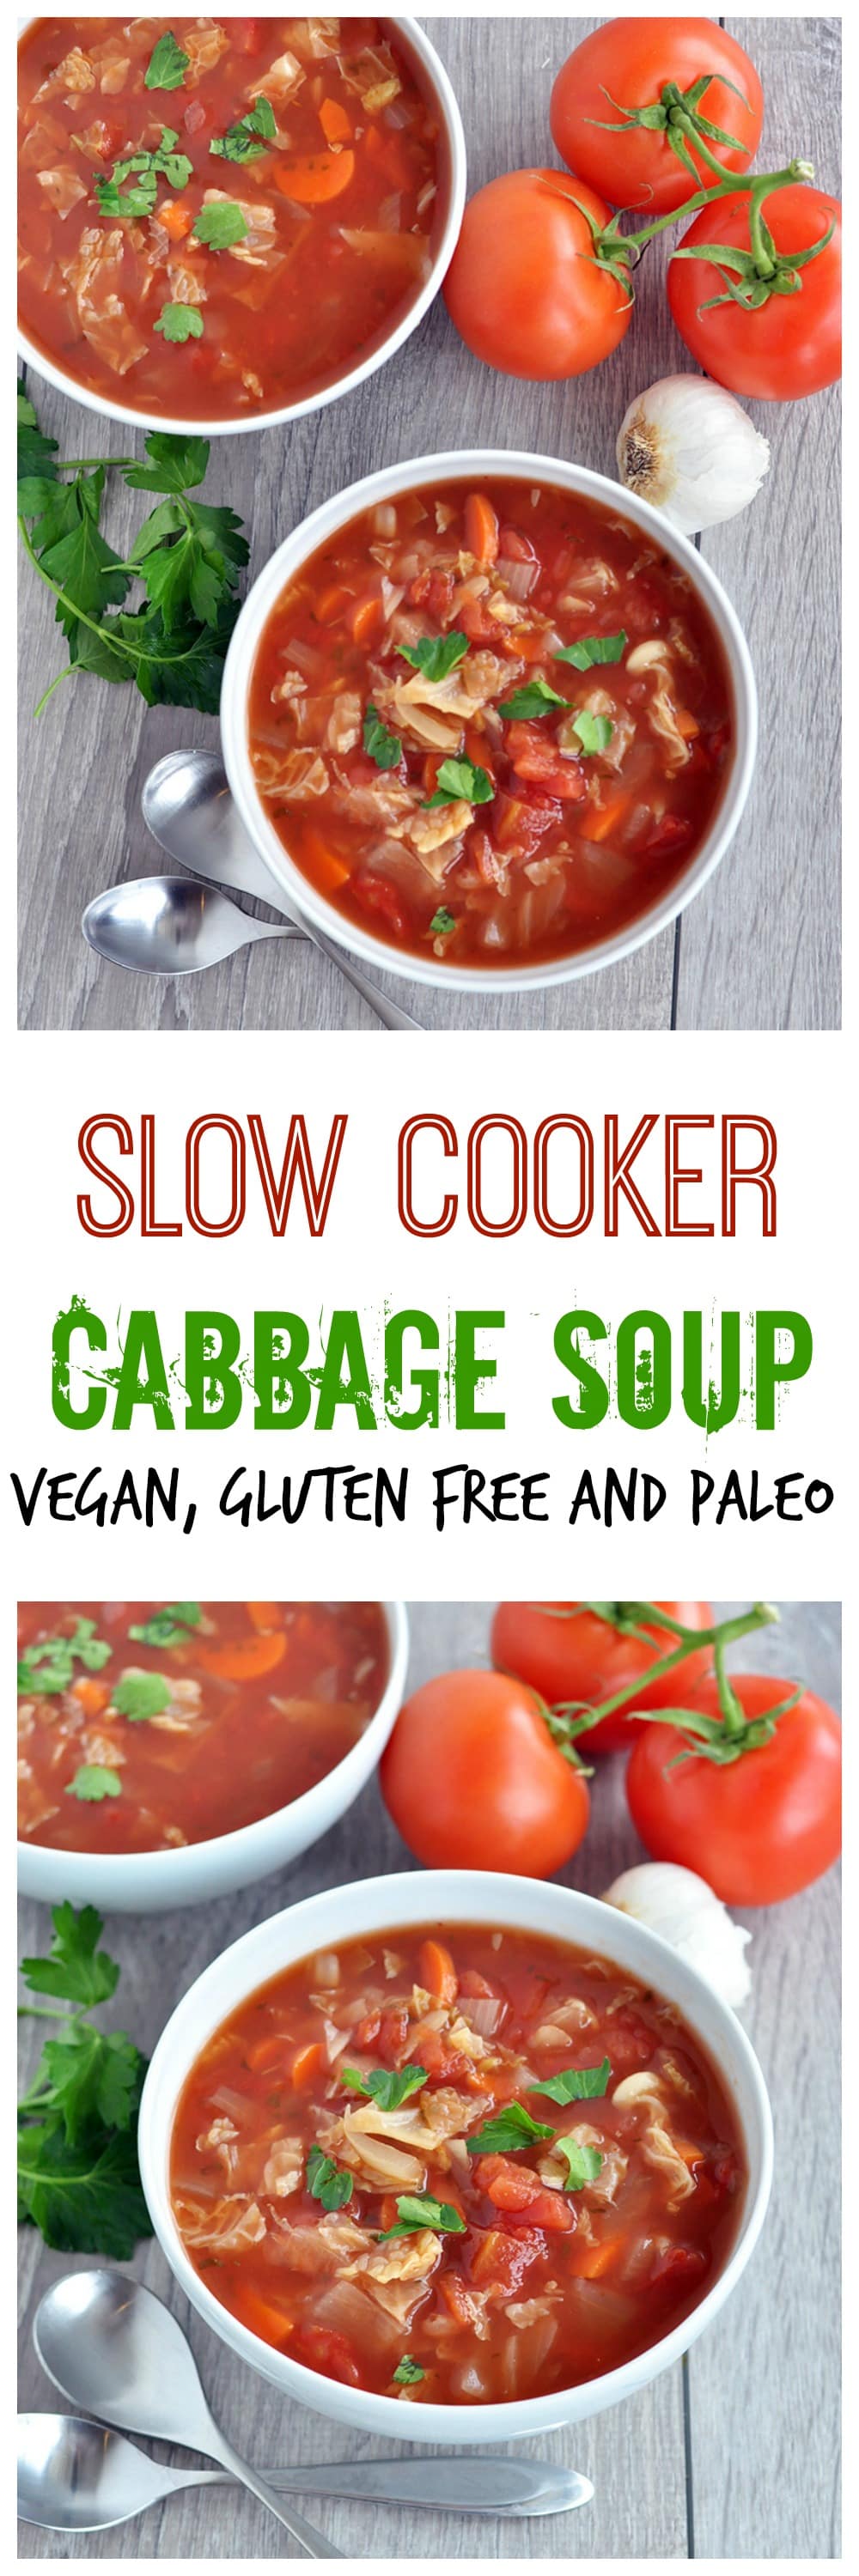 Slow Cooker Cabbage Soup - My Whole Food Life